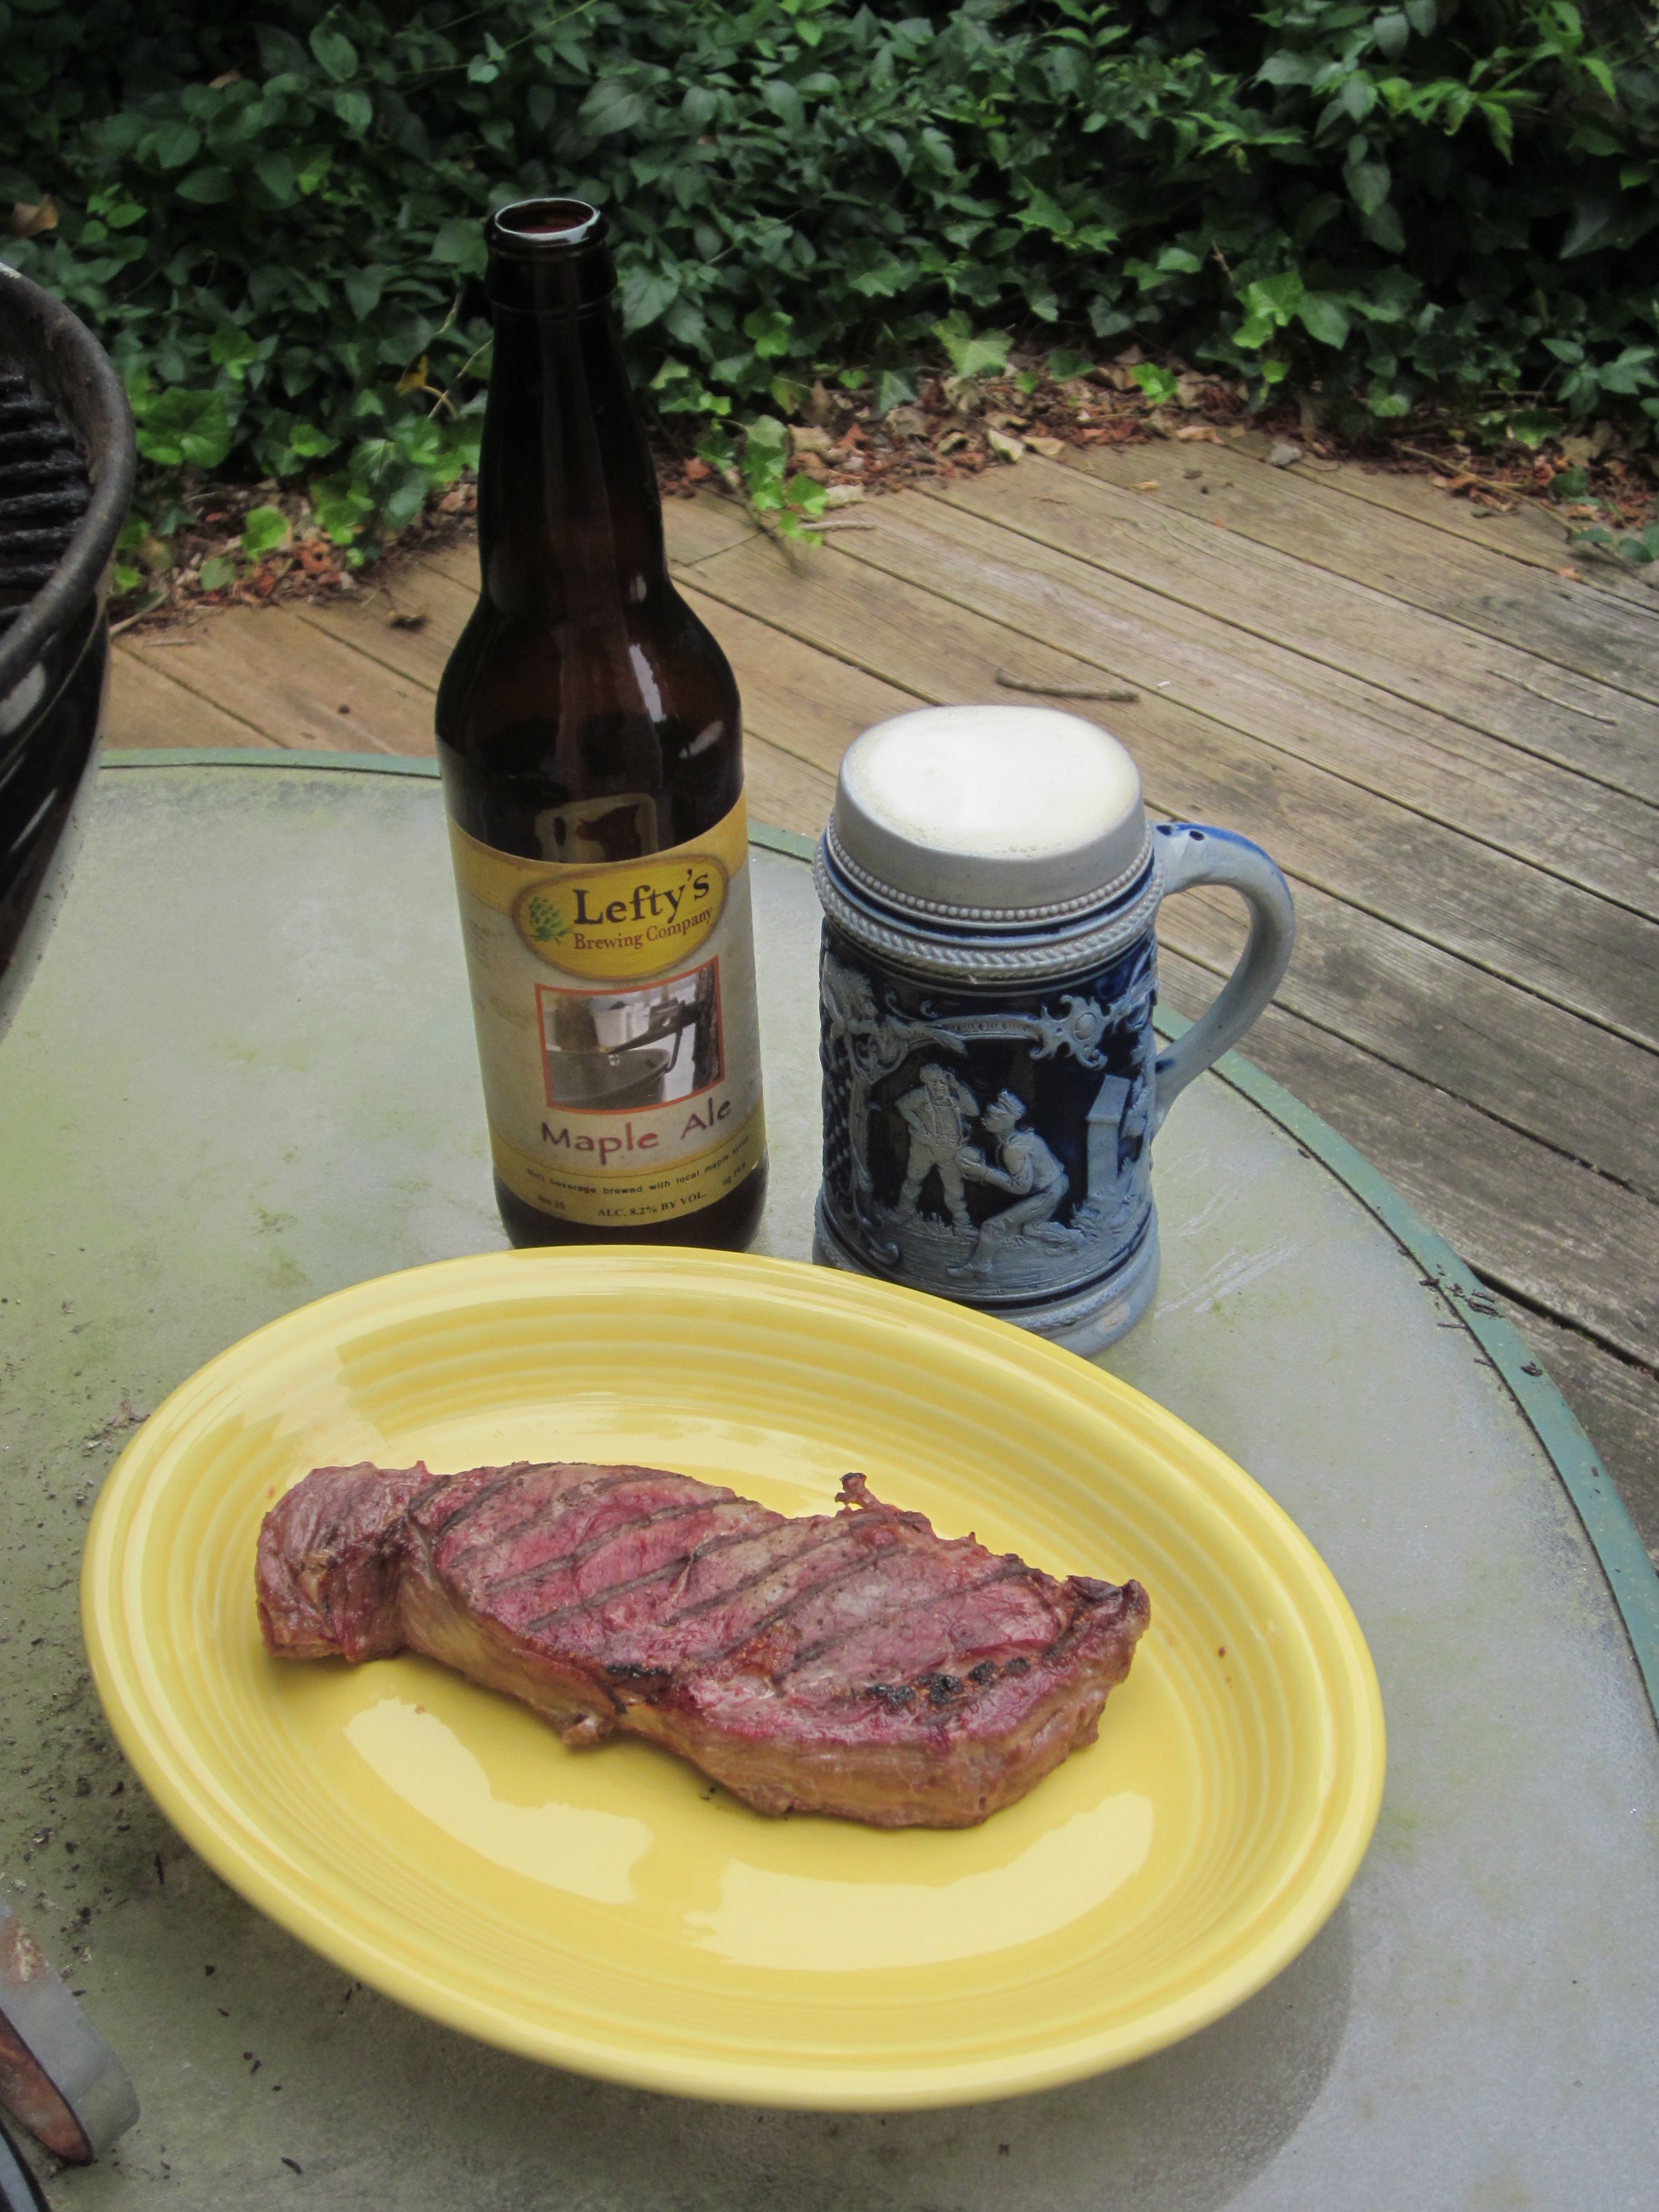 Lefty's maple Ale with a Grilled Steak